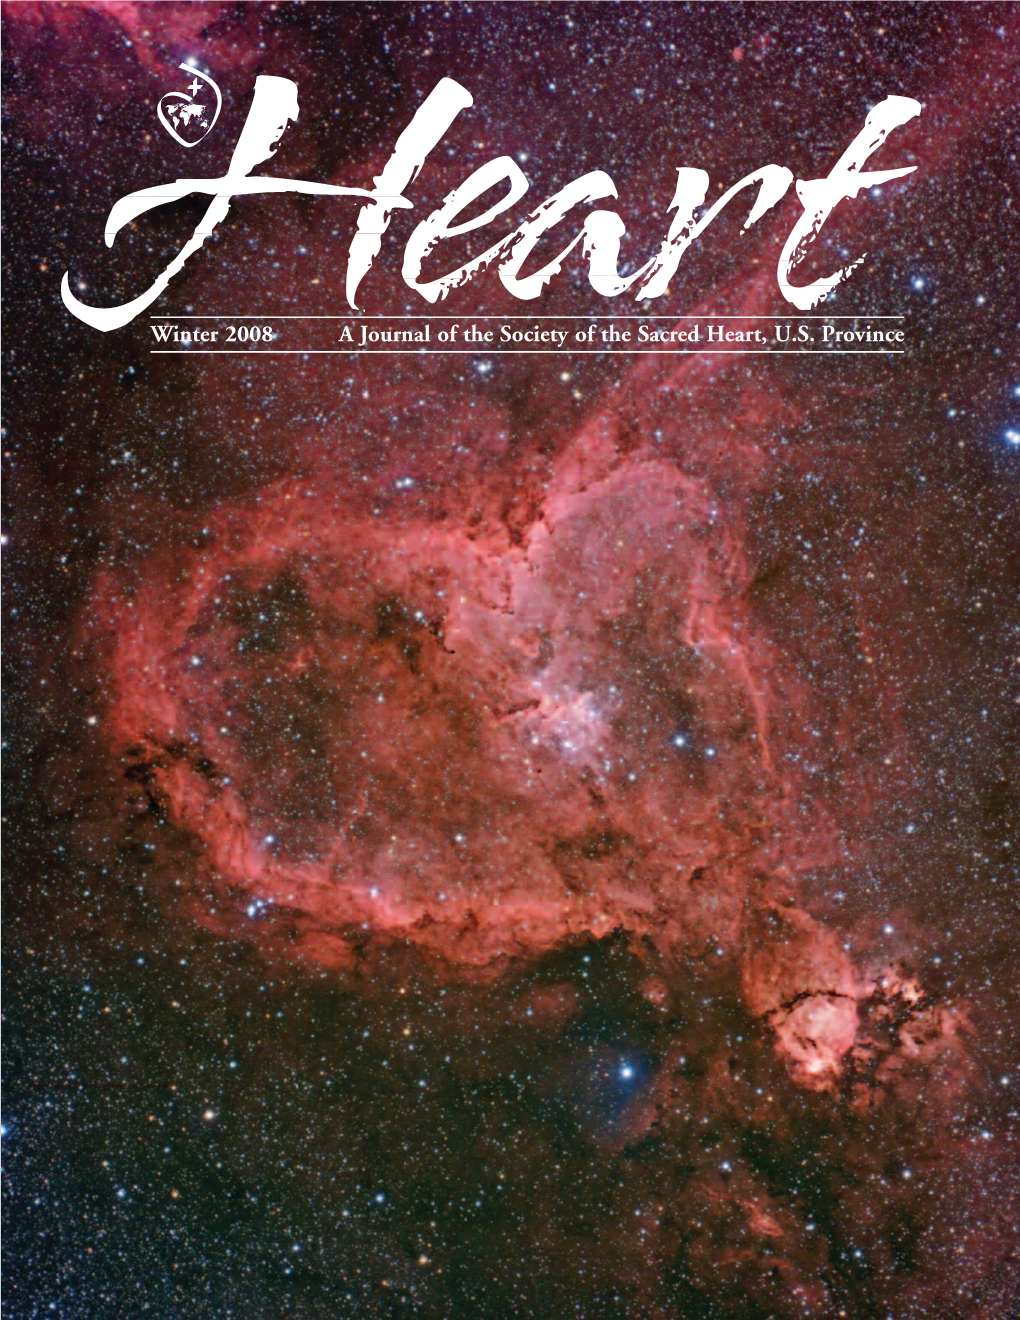 Winter 2008 a Journal of the Society of the Sacred Heart, U.S. Province …To Heart